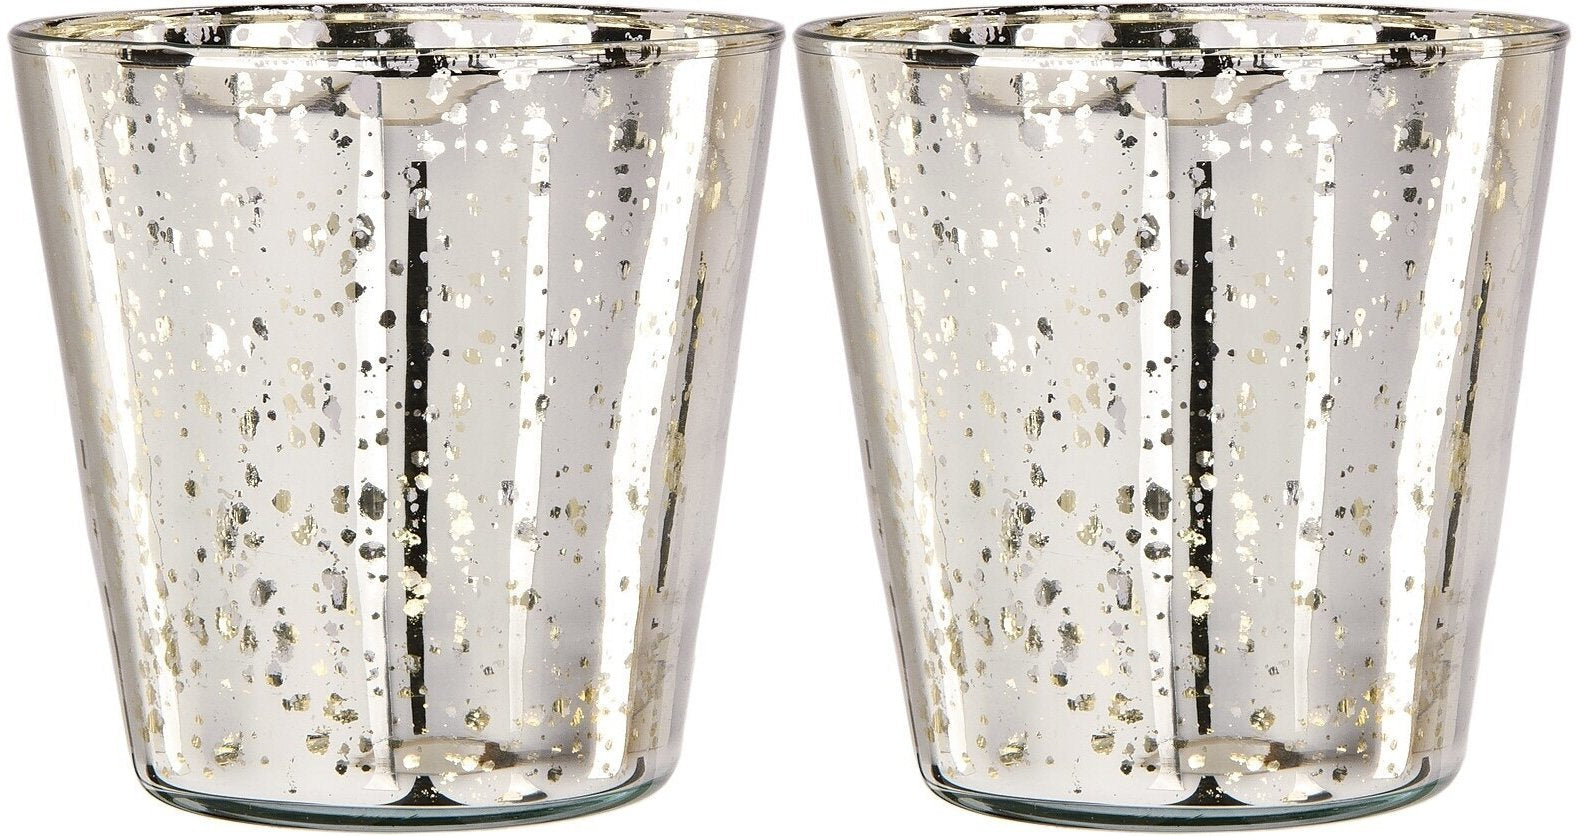  2 PACK | Vintage Mercury Glass Candle Holder (4-Inch, Jenna Design Cup, Silver) - Decorative Candle Holder - For Home Decor, Parties and Wedding Decorations - AsianImportStore.com - B2B Wholesale Lighting and Decor